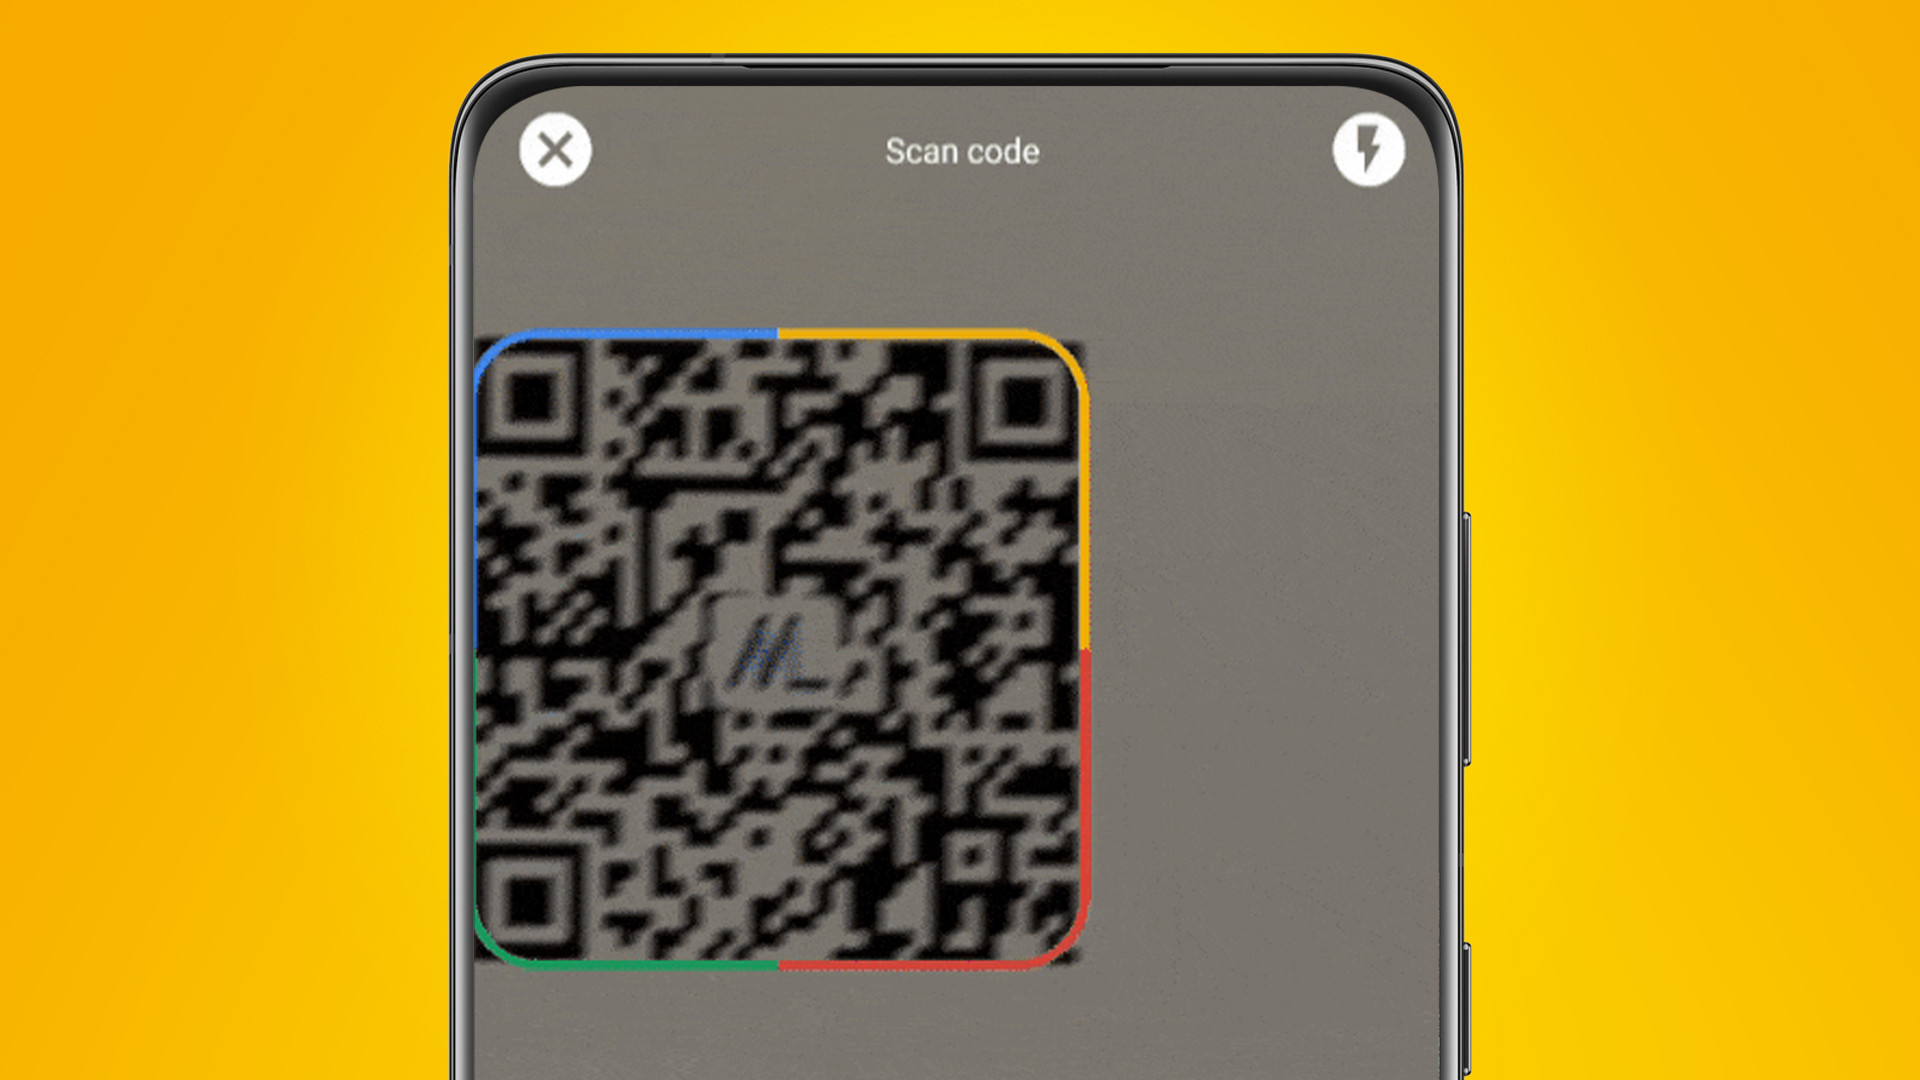 An Android phone on an orange background scanning a QR code